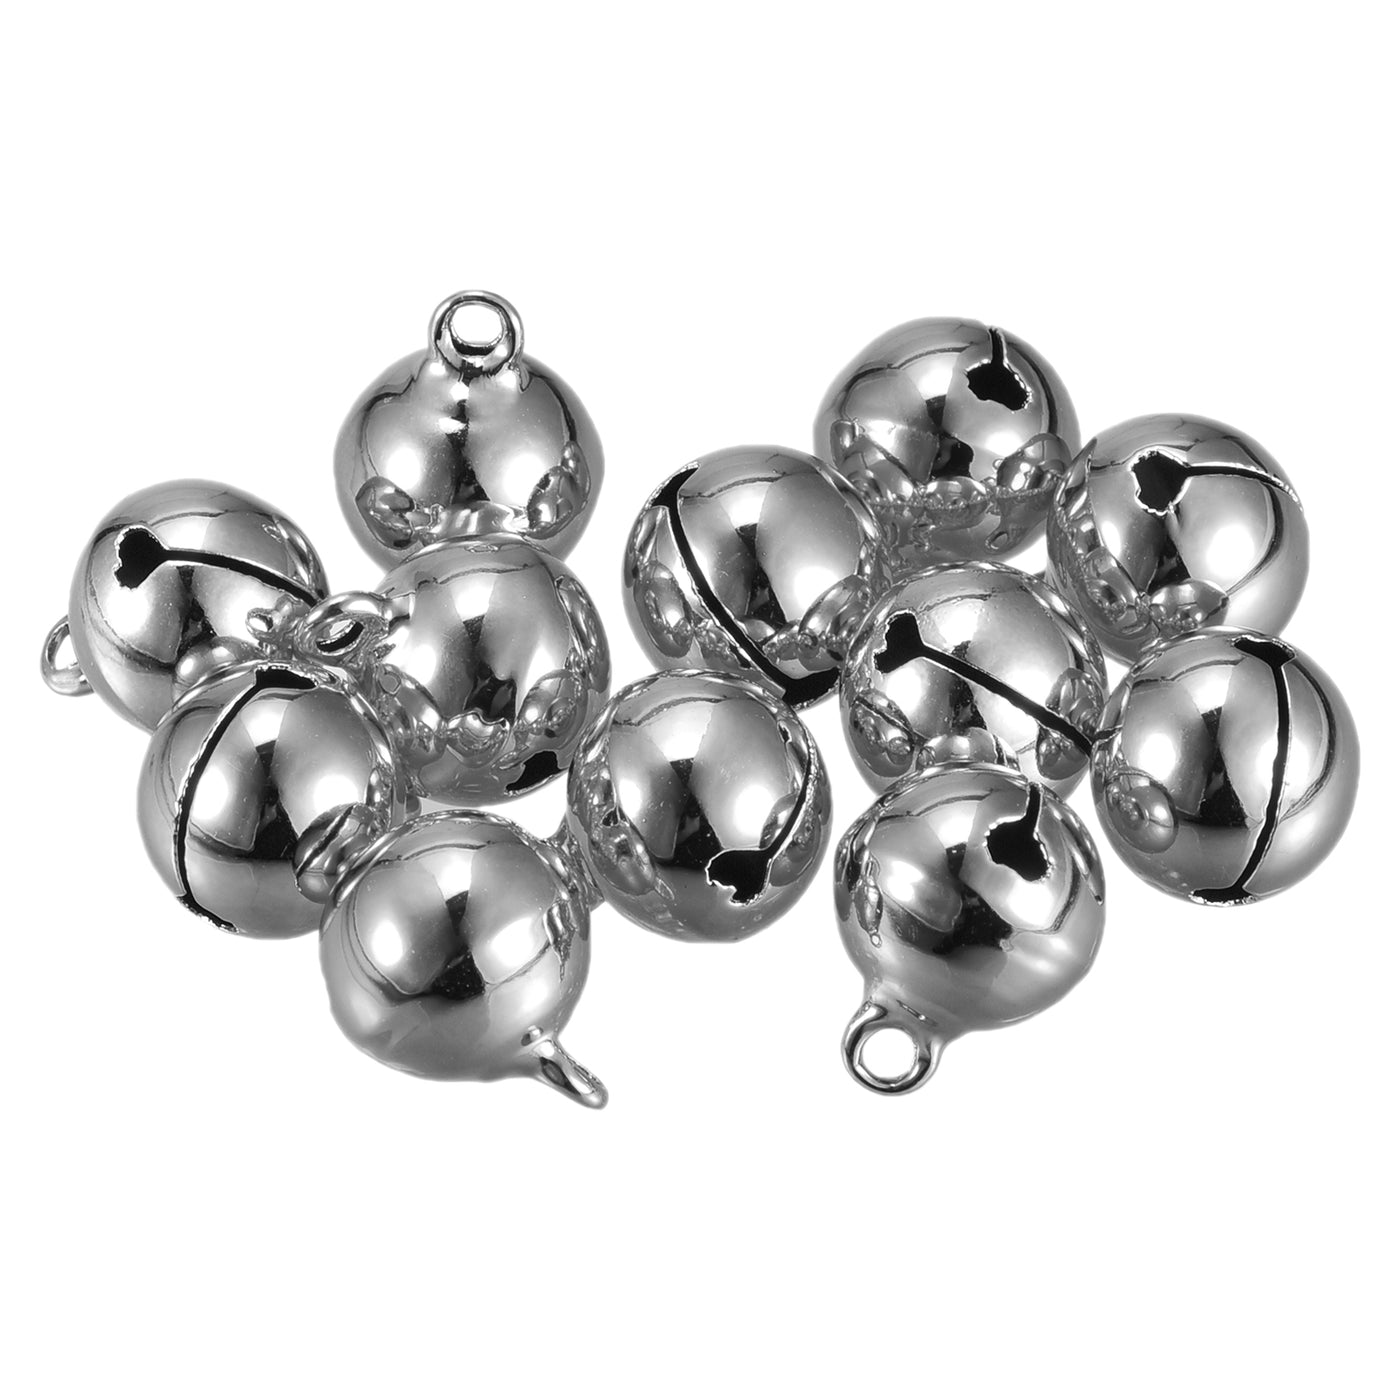 Uxcell Uxcell Jingle Bells, 14mm 100pcs Small Bells for Craft DIY Christmas, Silver Tone